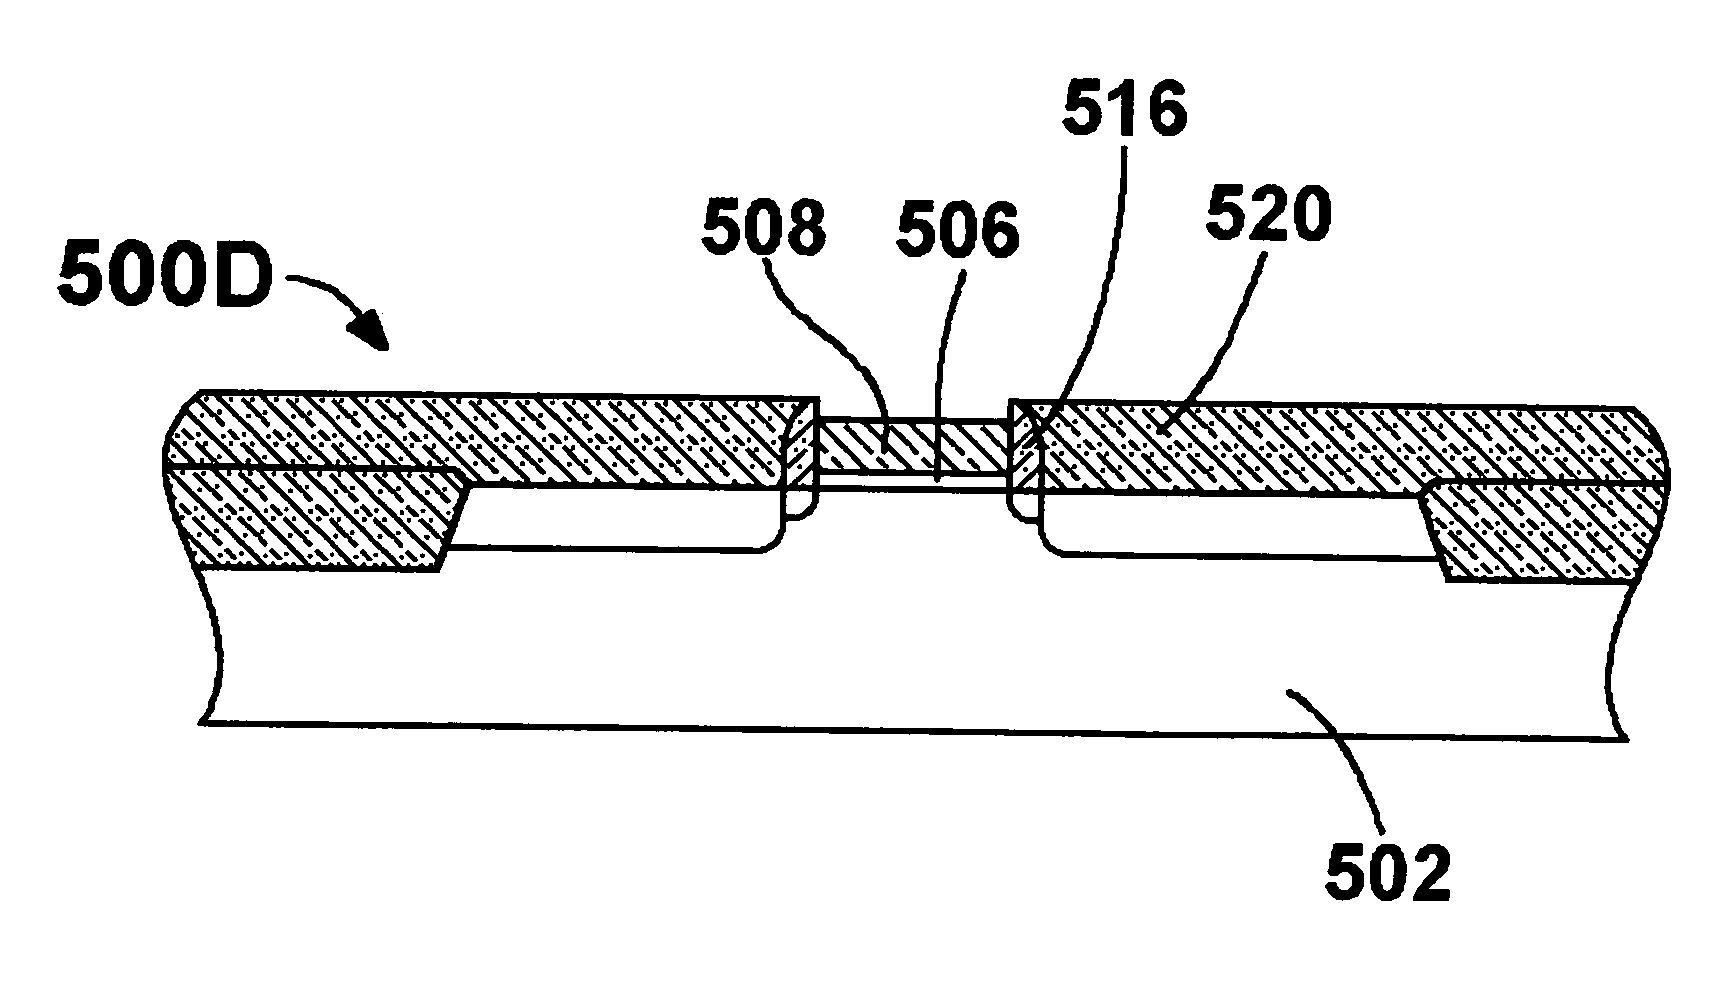 Replacement gate field effect transistor with germanium or SiGe channel and manufacturing method for same using gas-cluster ion irradiation